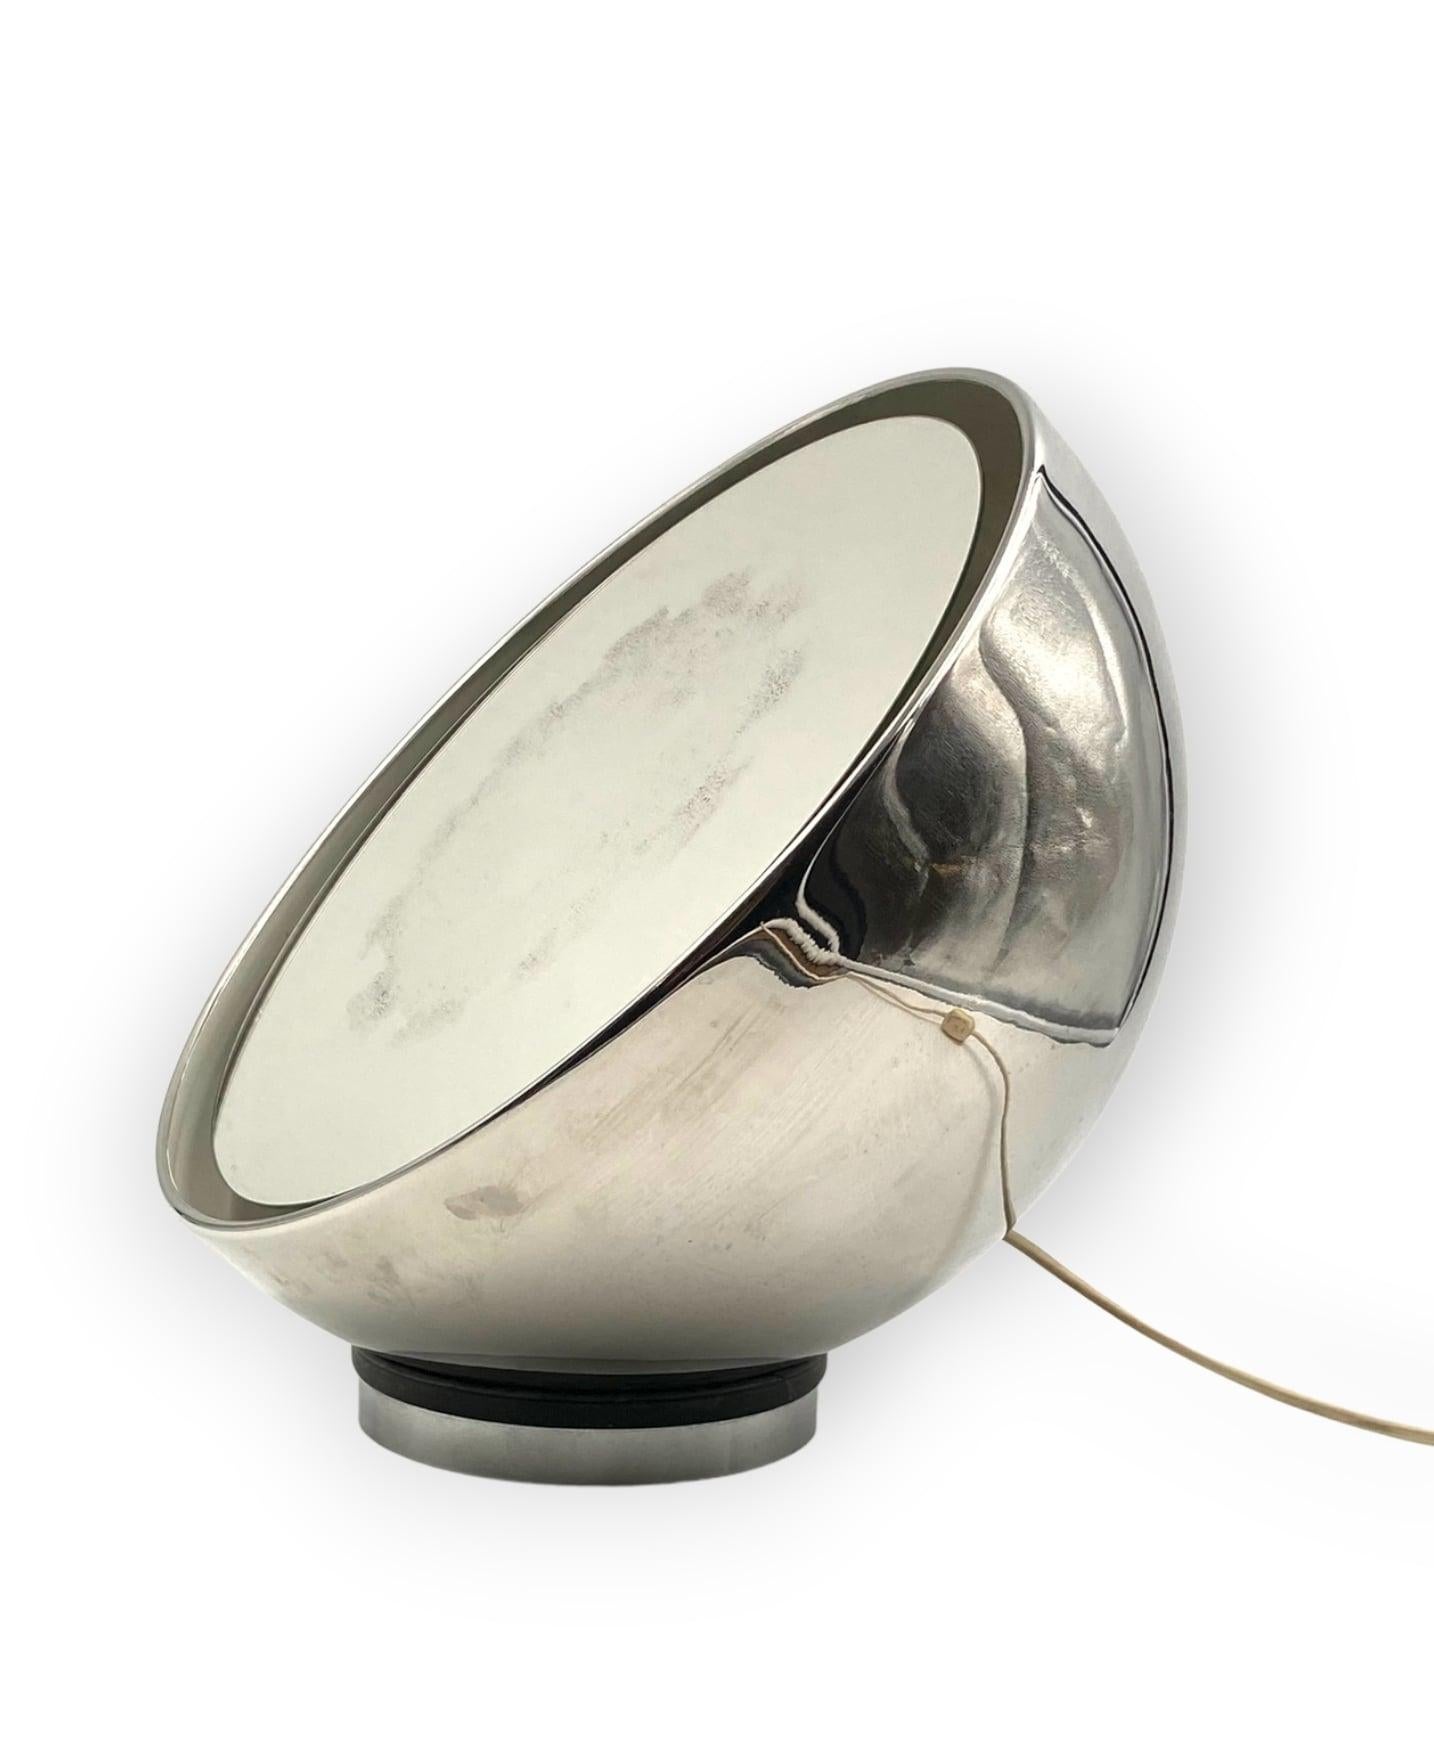 Mirror Spherical Table Lamp, Italy, 1970s For Sale 5